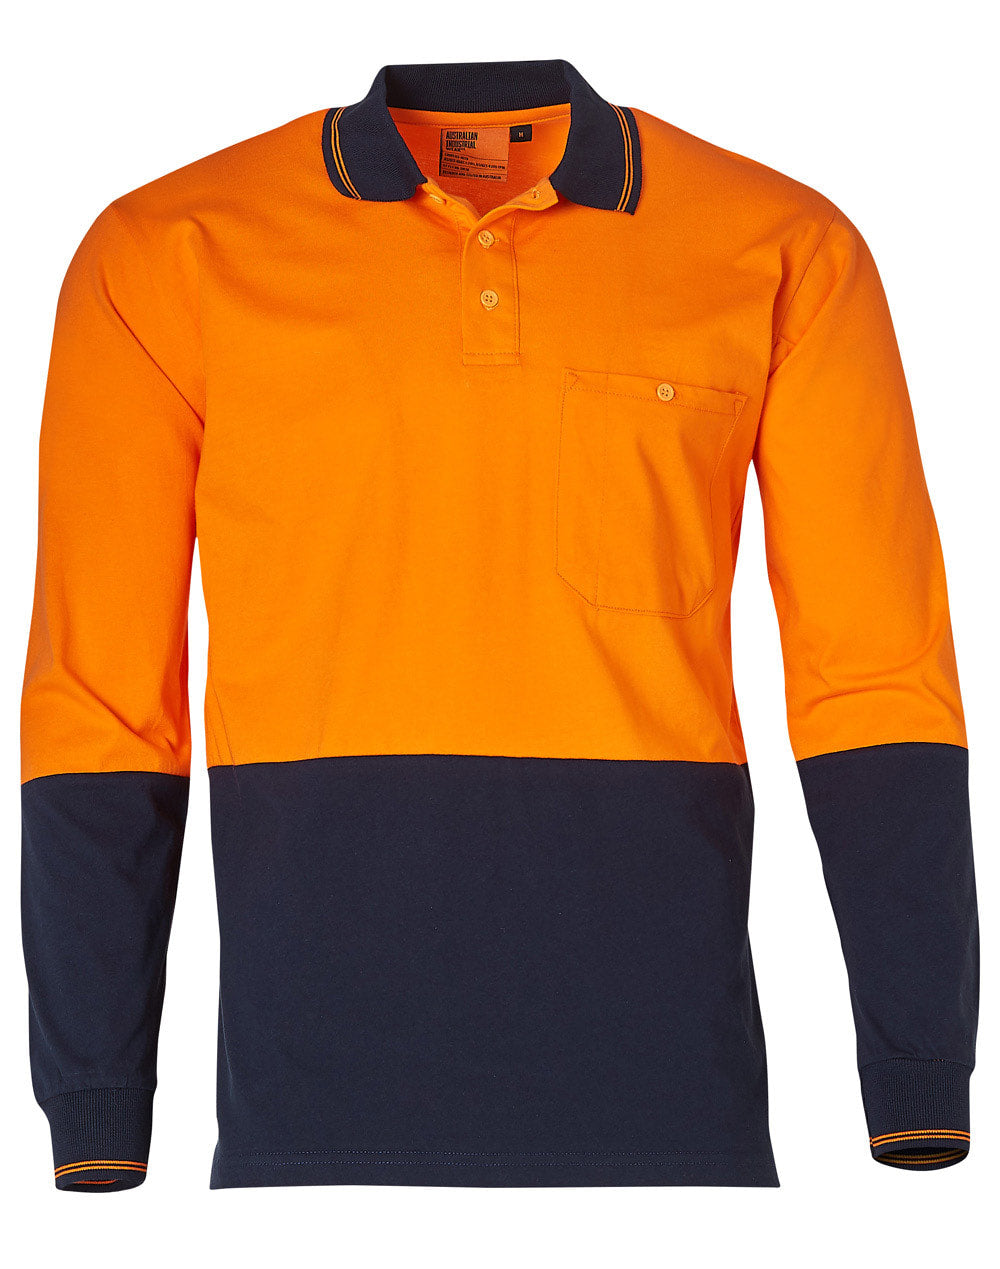 AIW SW36 Cotton Jersey two tone Long Sleeve Safety Polo